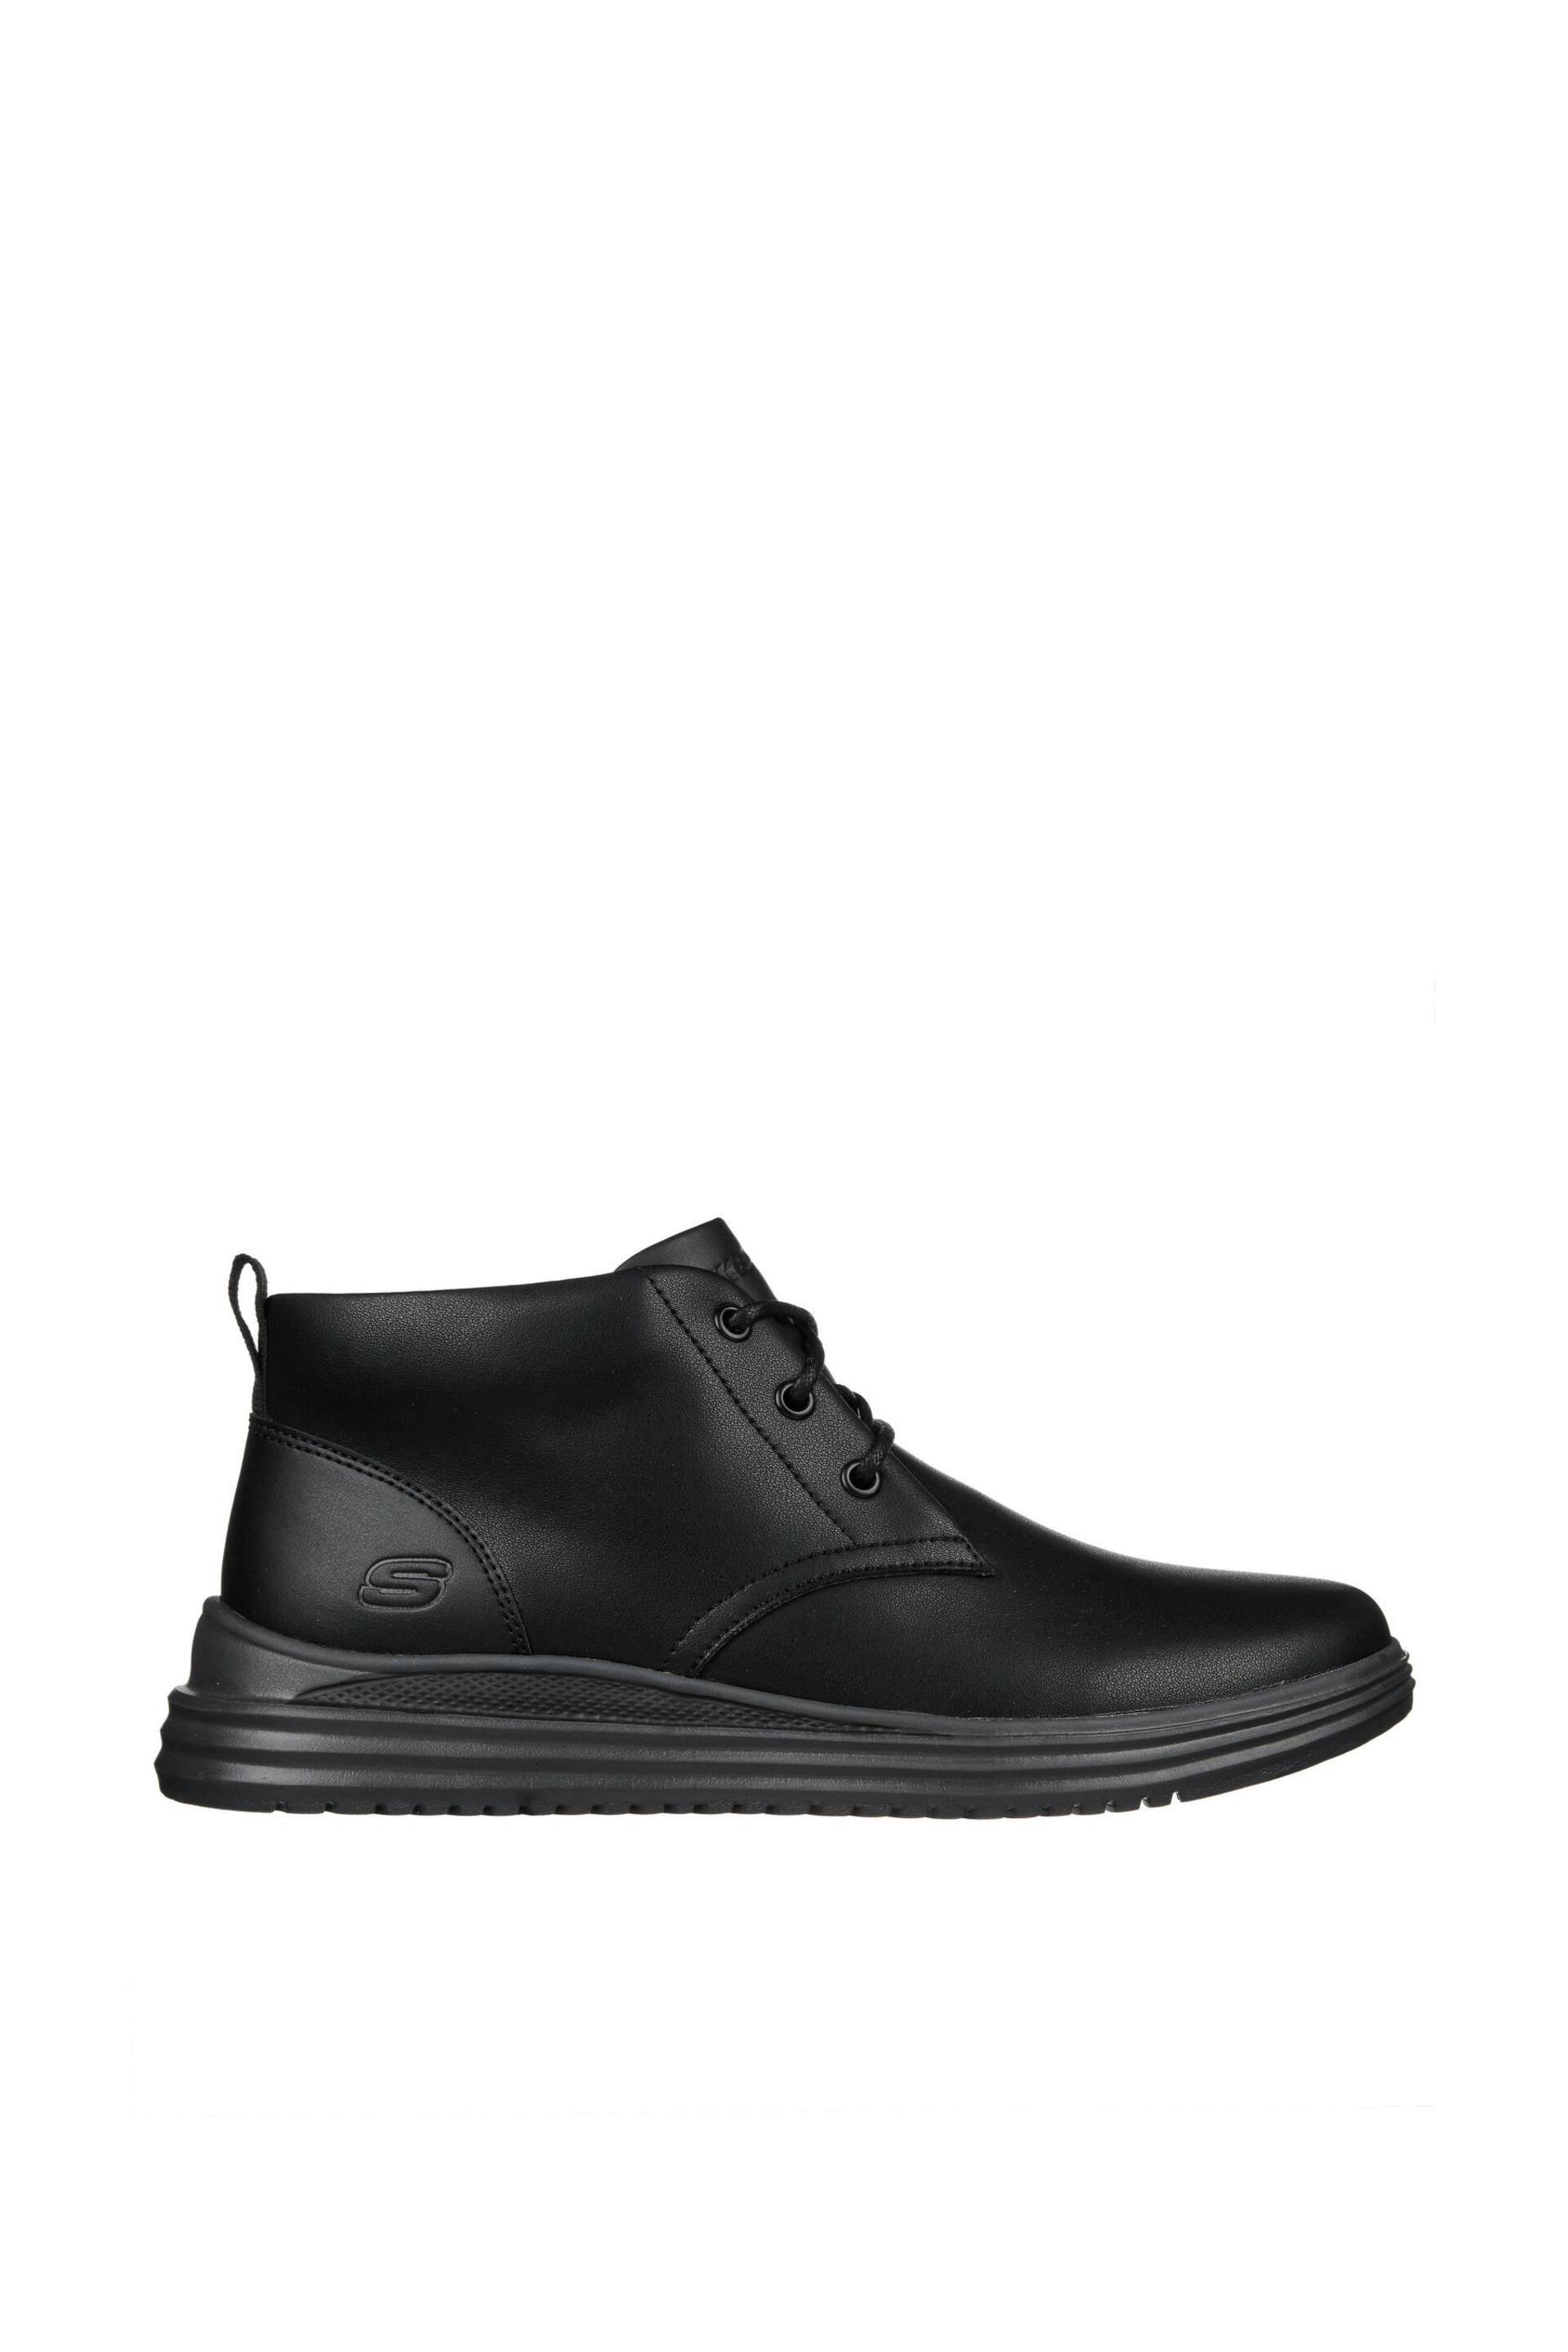 Skechers Black Proven Mens Boots - Image 2 of 5